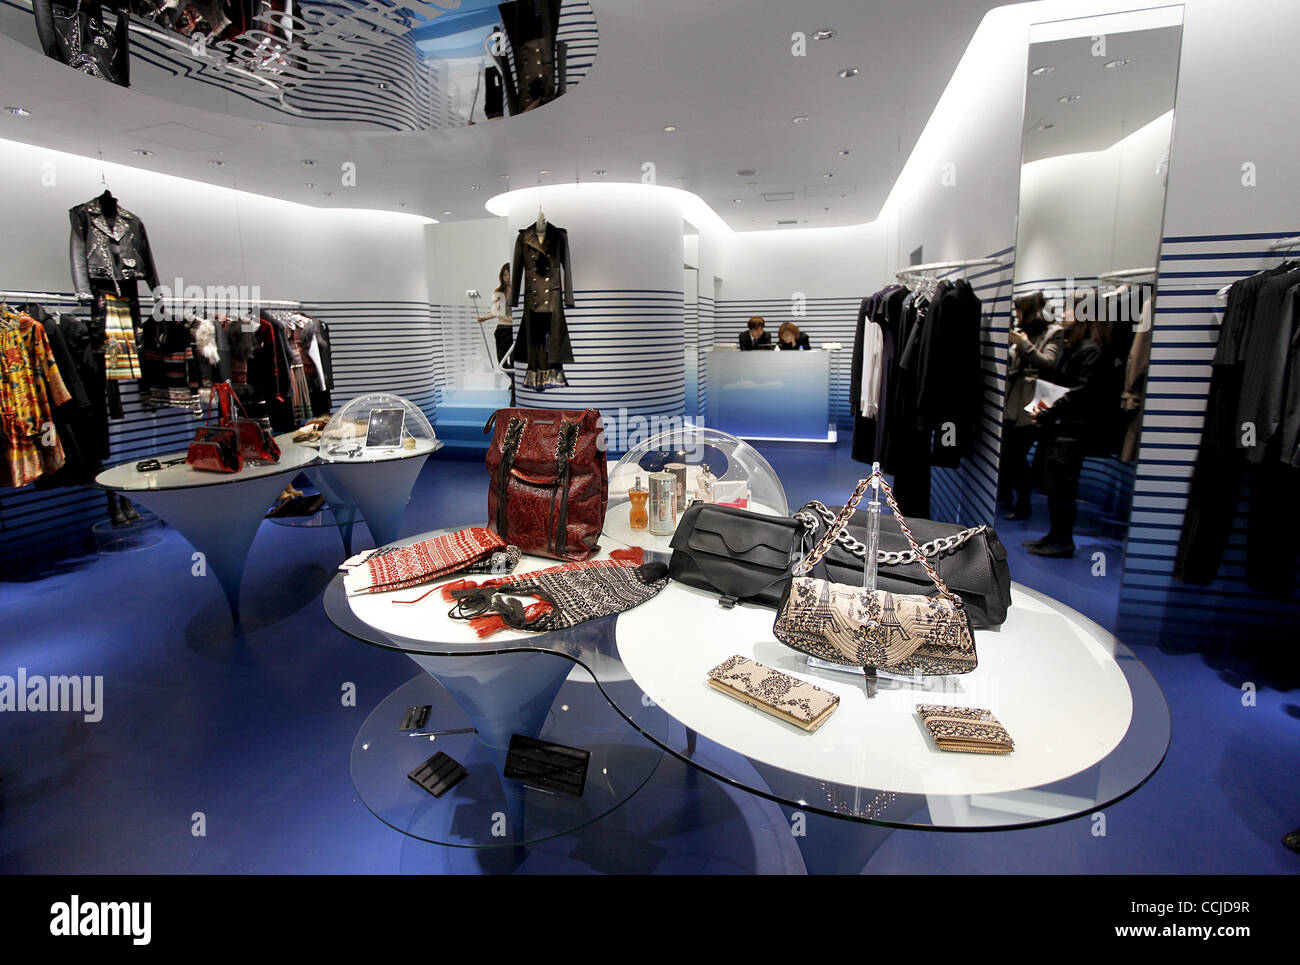 Dec. 17, 2010 - Tokyo, Japan - General view of the interior appearance of  the Jean-Paul GAULTIER Ginza store in Tokyo, Japan. Gaultier's world's  first store with the new concept of the